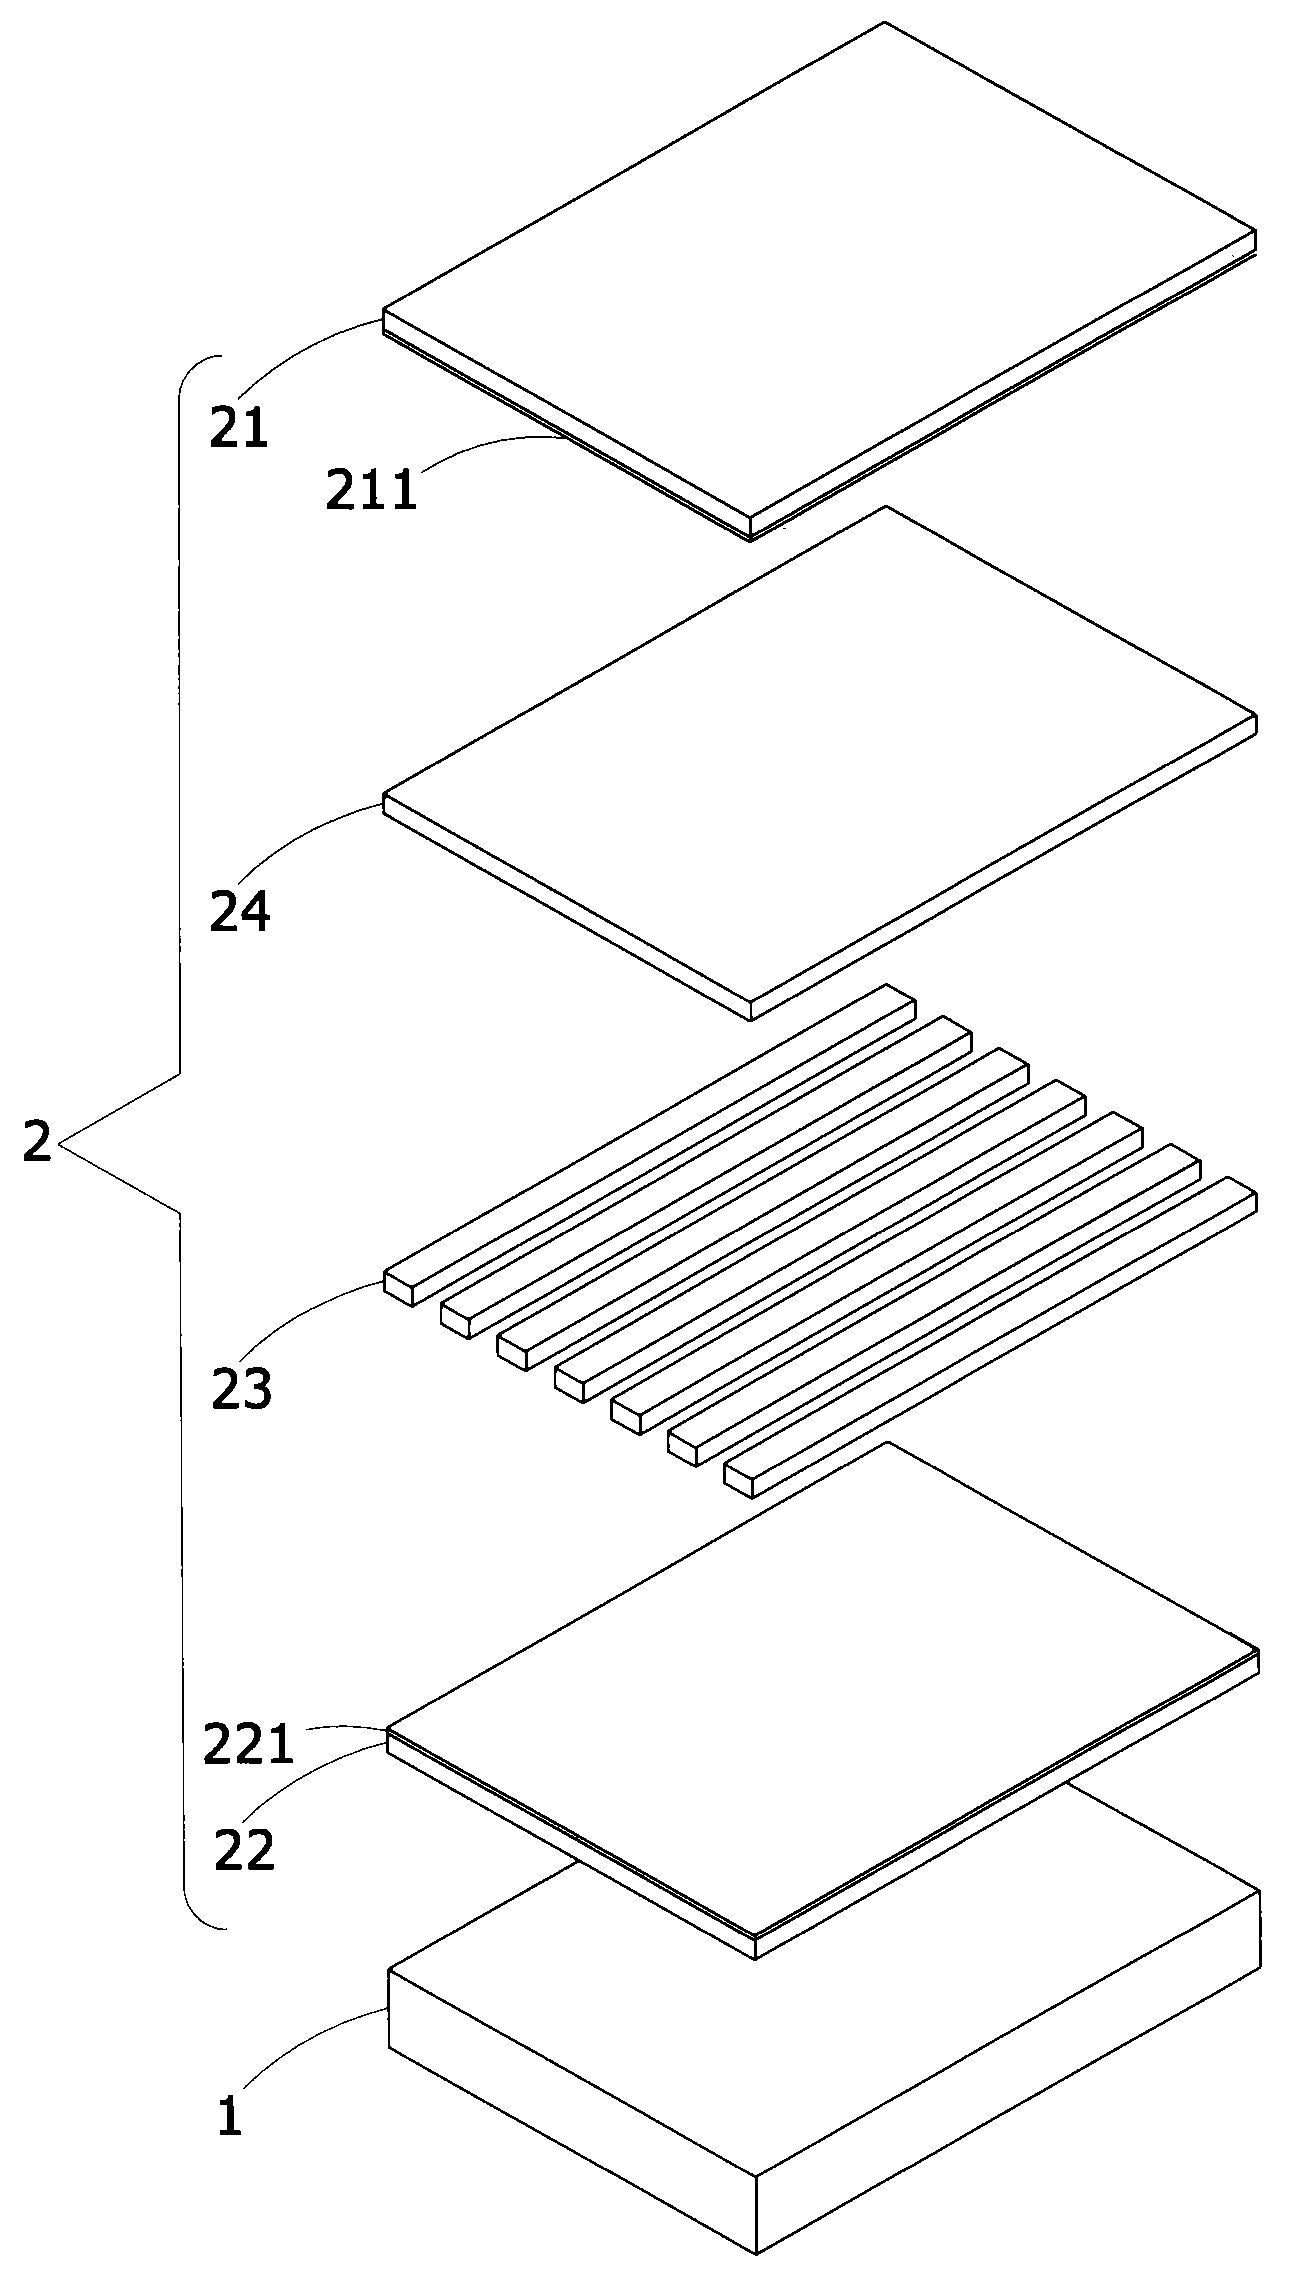 2D/3D(2 dimensional/3 dimensional) image switching display device